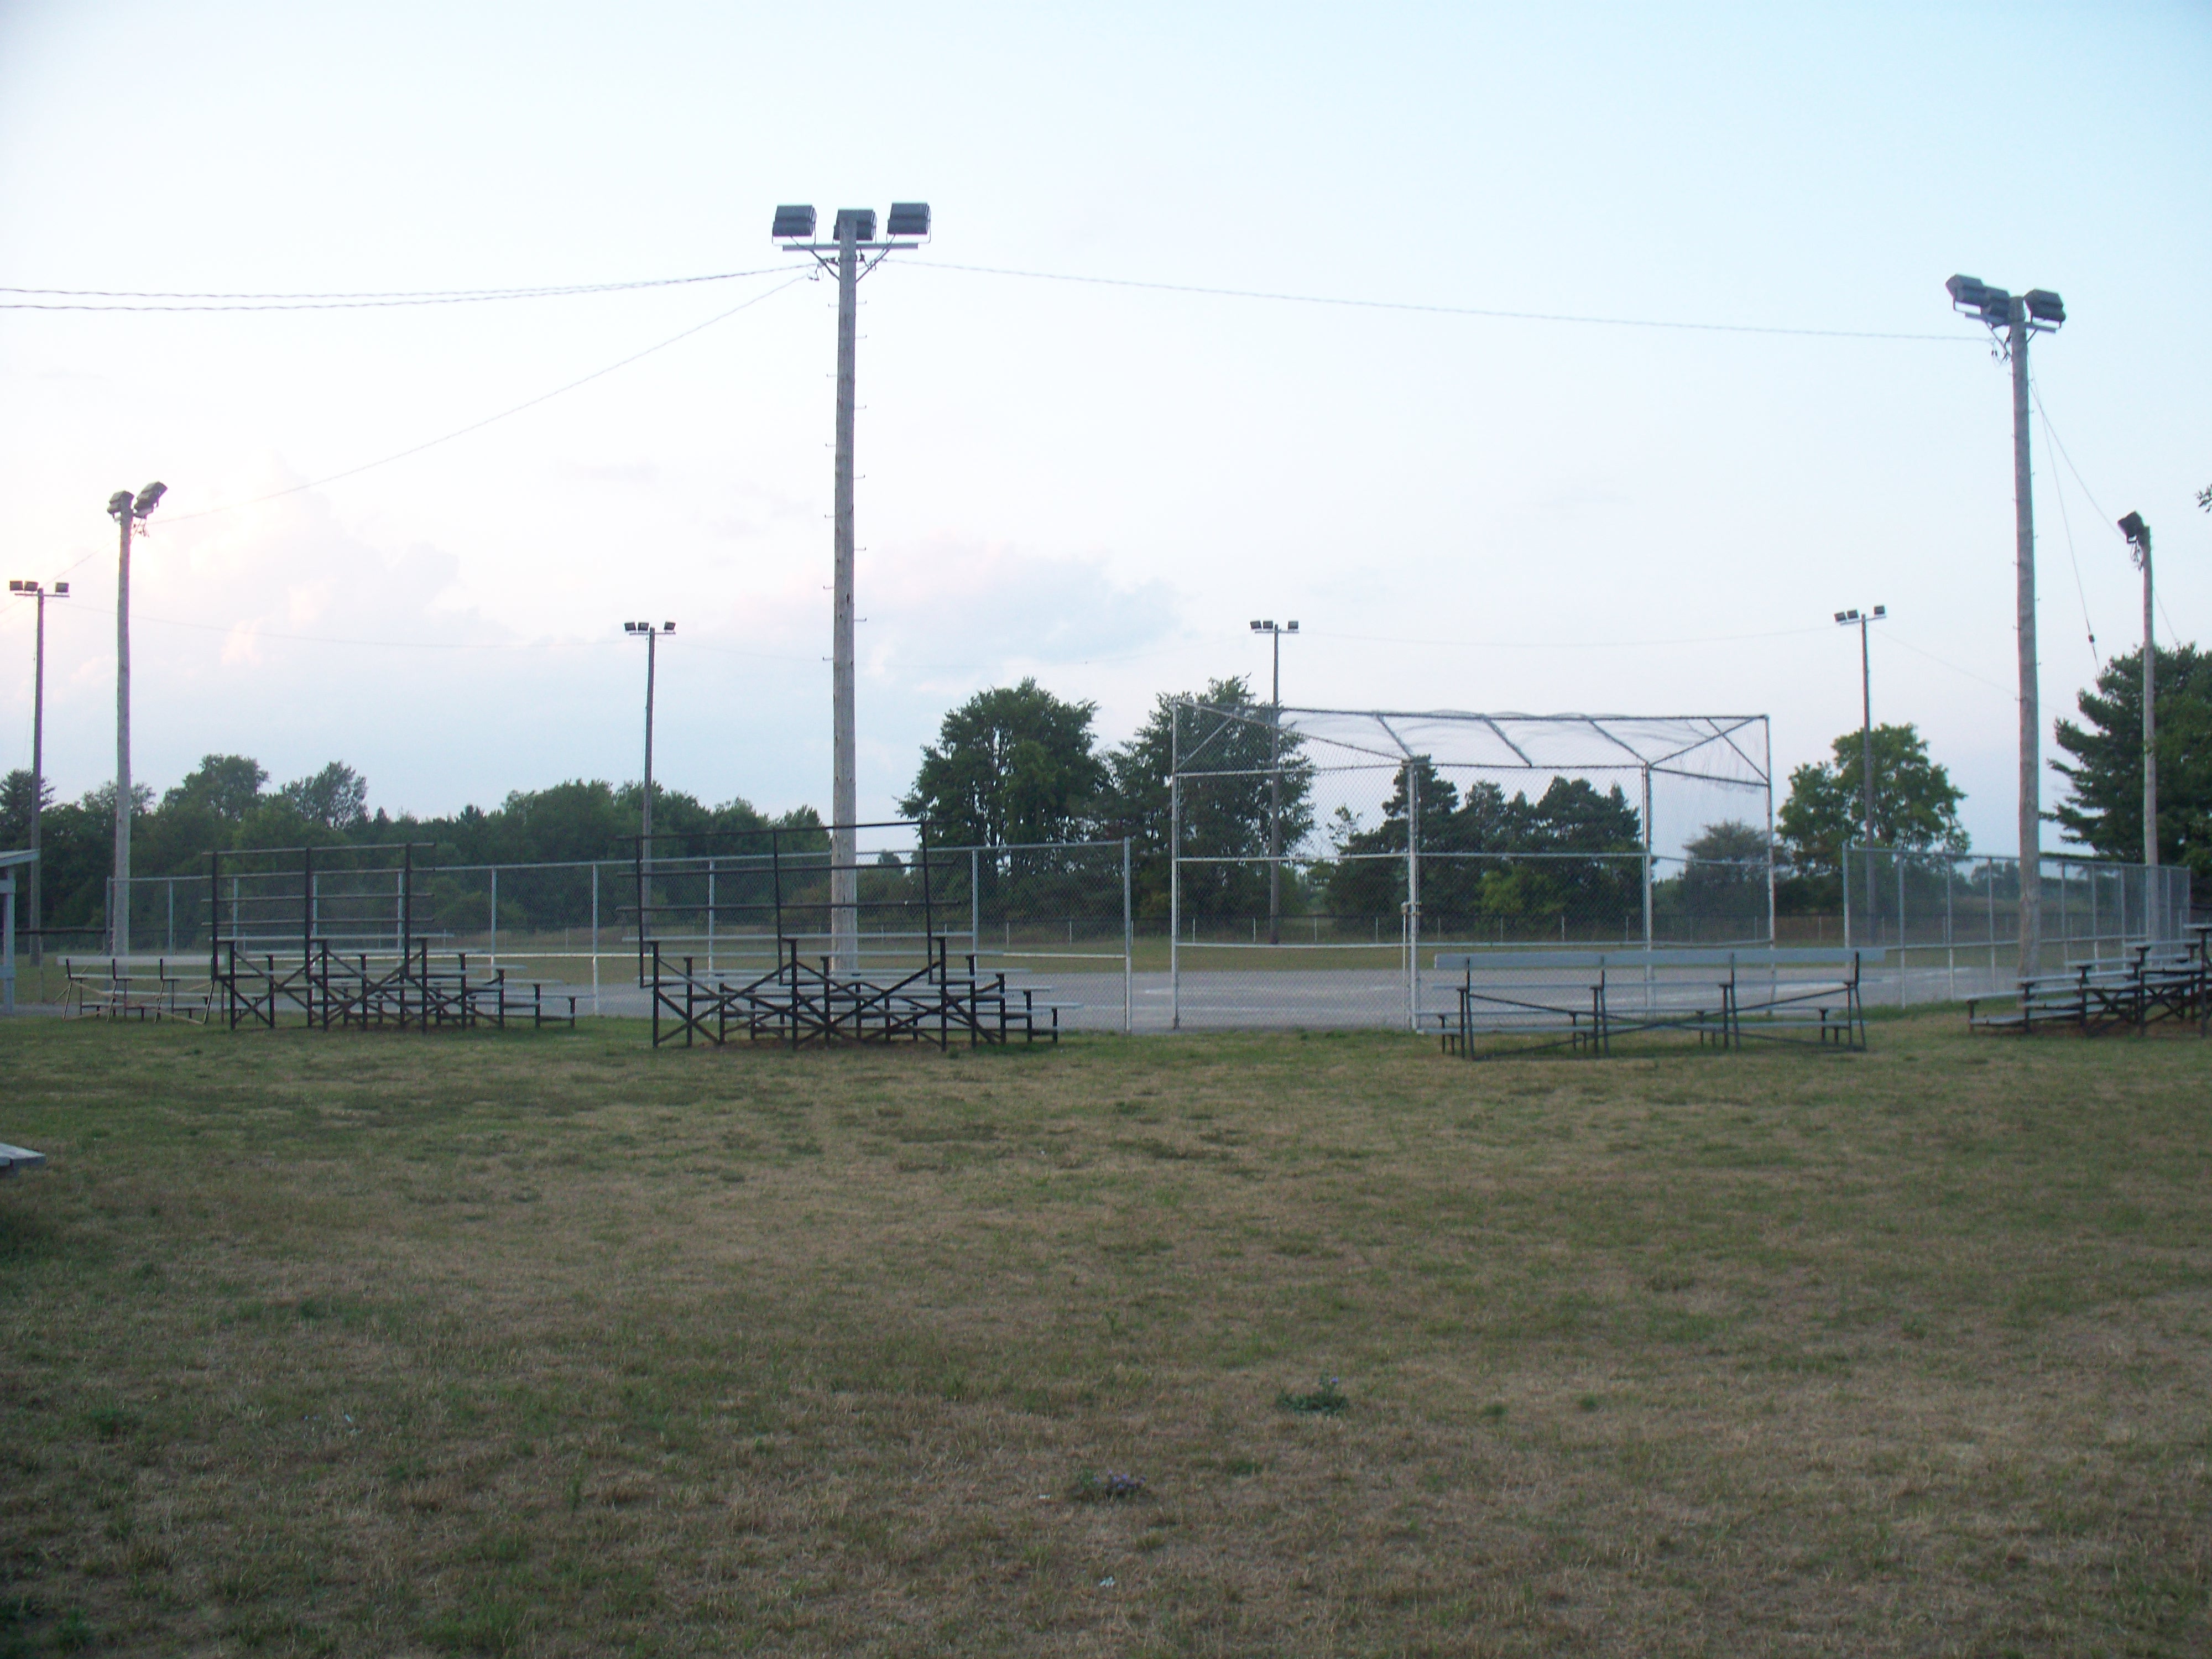 Maynard ball diamond, complete with dugouts, bleachers and lights